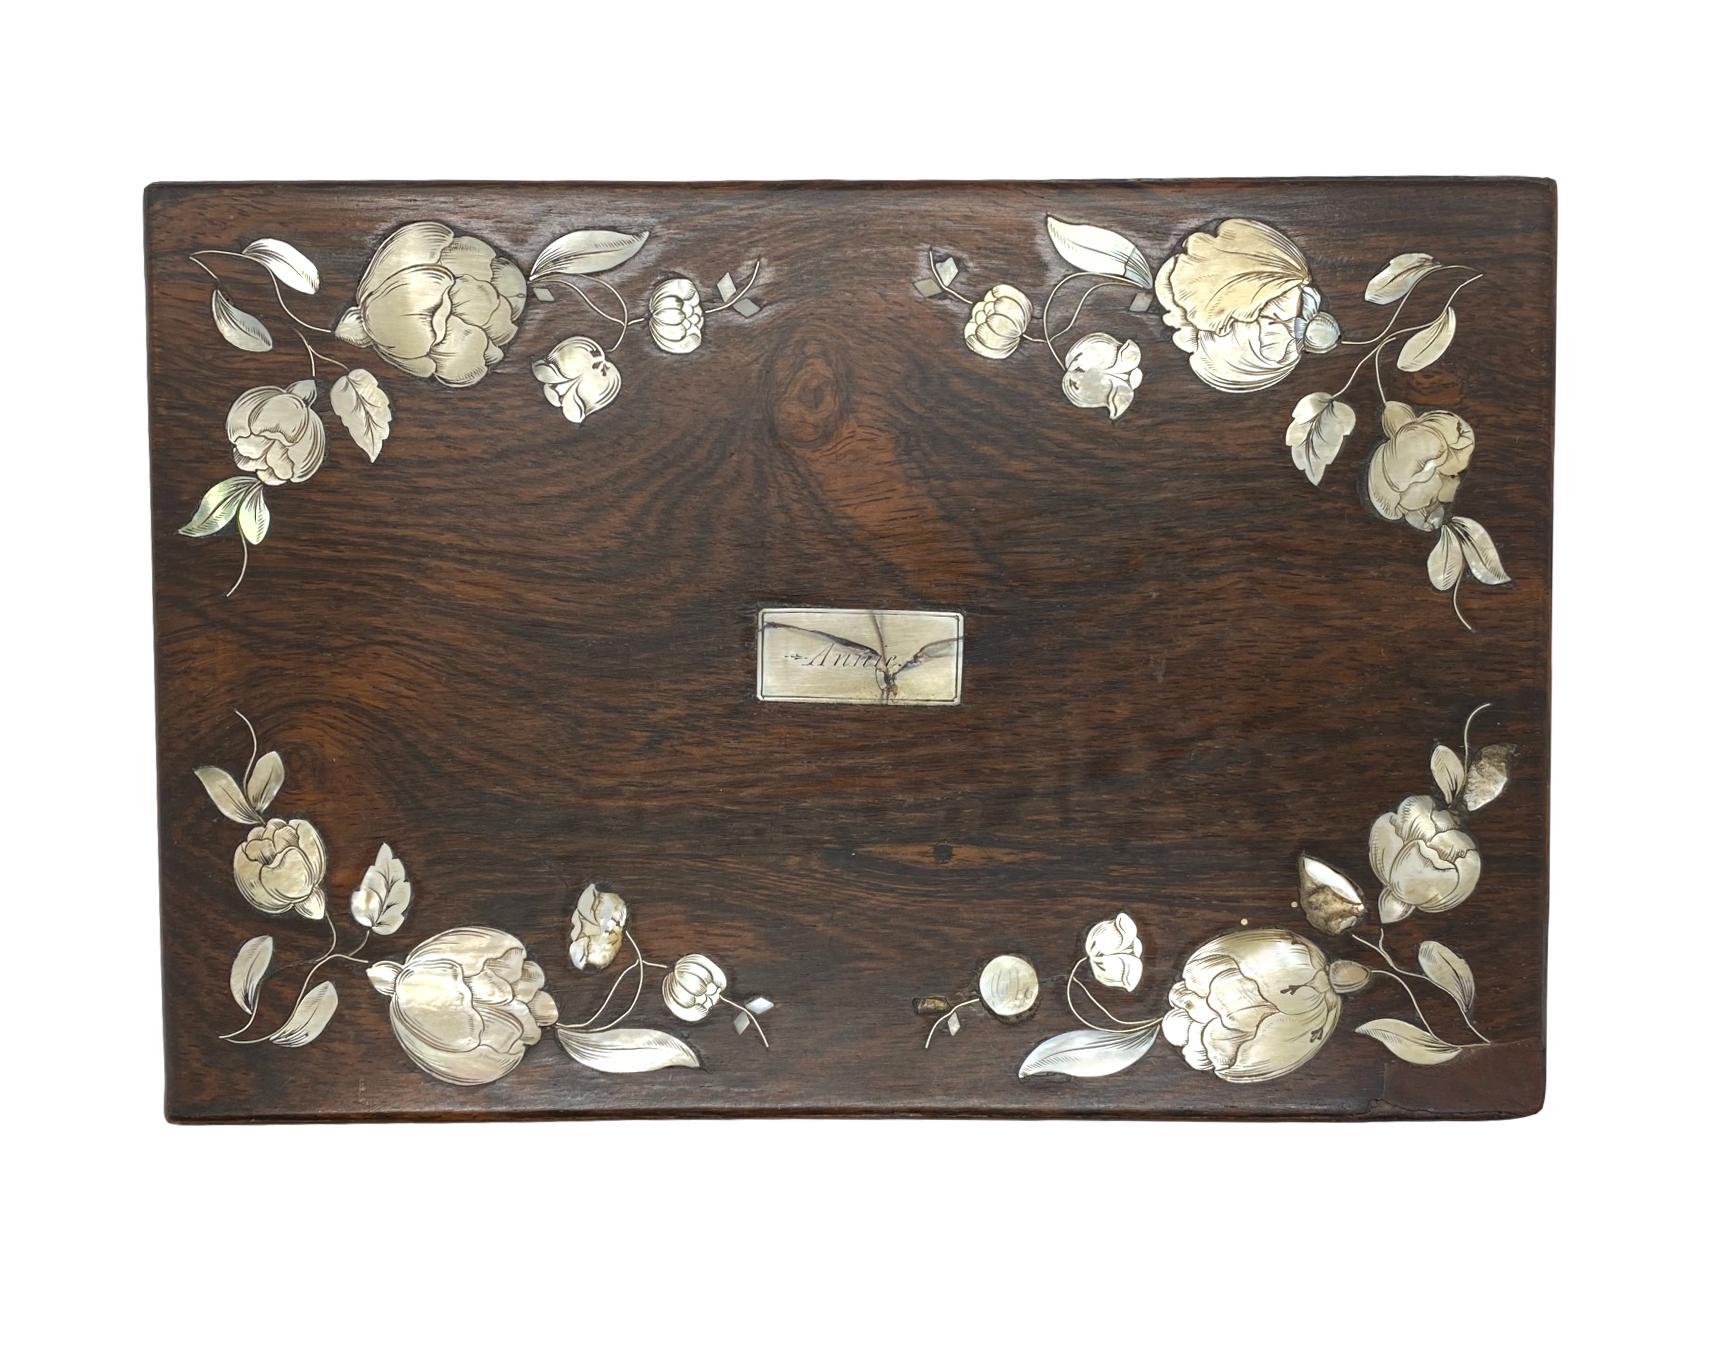 19th Century Rosewood Stationery Box with Fine Inlaid Mother of Pearl Flowers, circa 1840